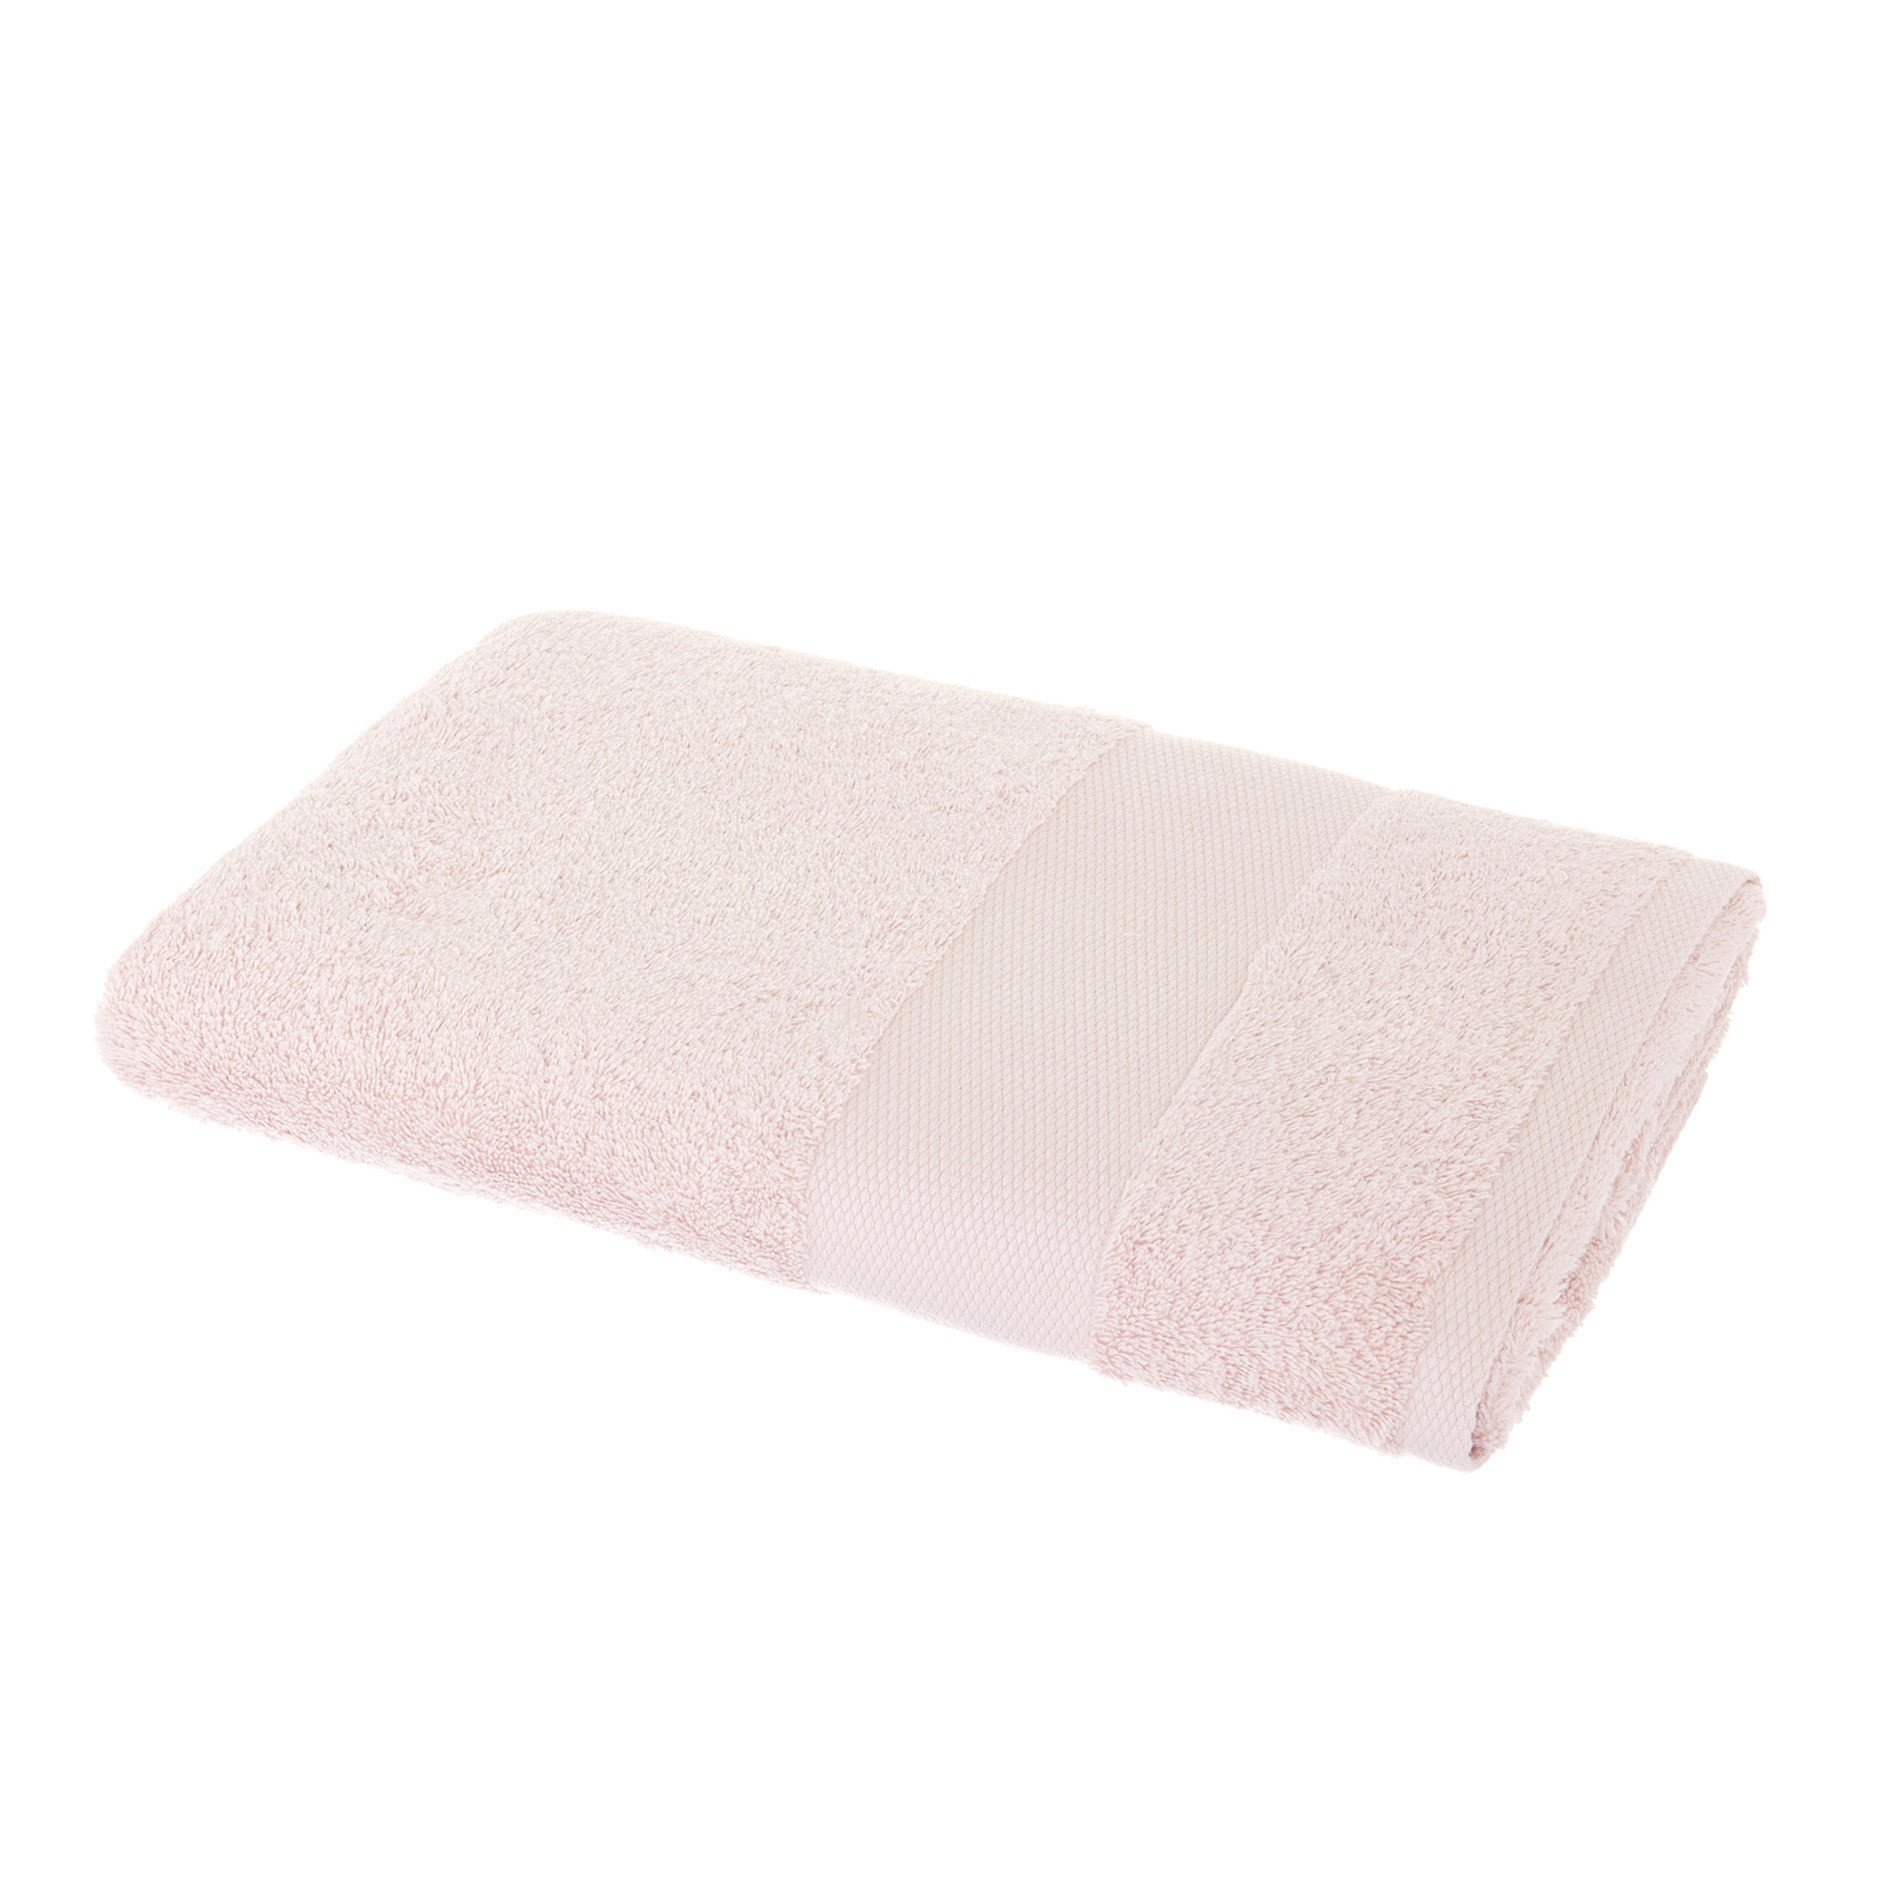 Zefiro pure cotton terry towel, Powder Pink, large image number 1